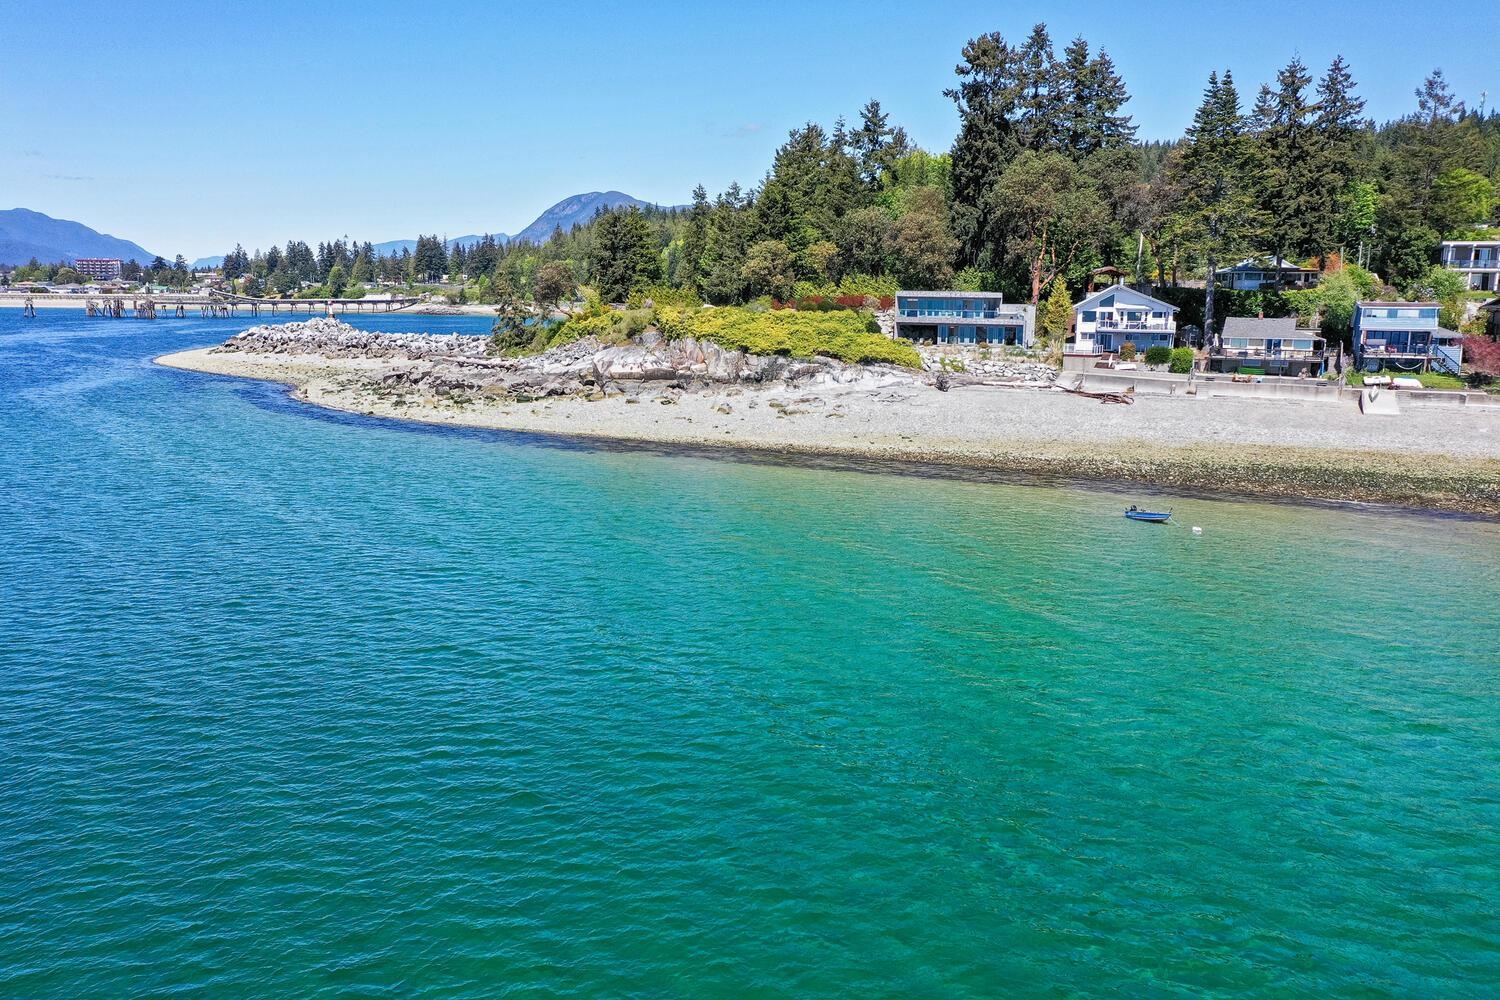 Sechelt District House/Single Family for sale:  2 bedroom 1,316 sq.ft. (Listed 3600-05-20)